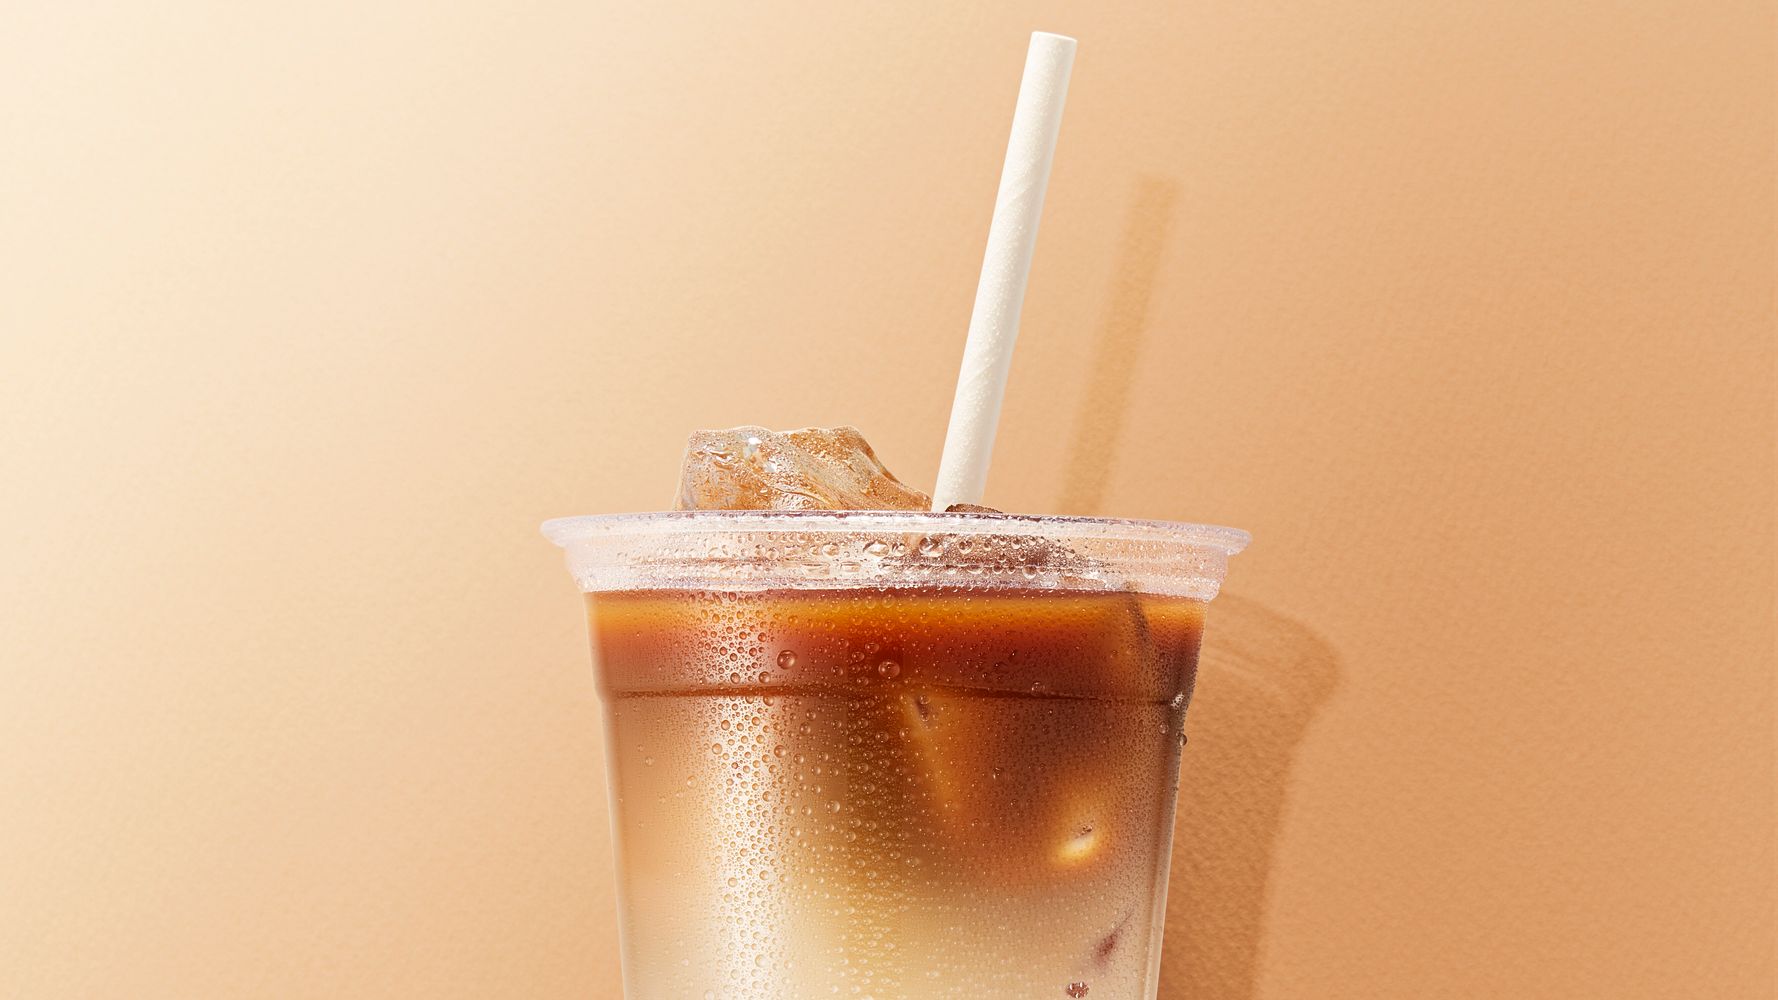 Cold brew coffee straws: Are they really necessary?